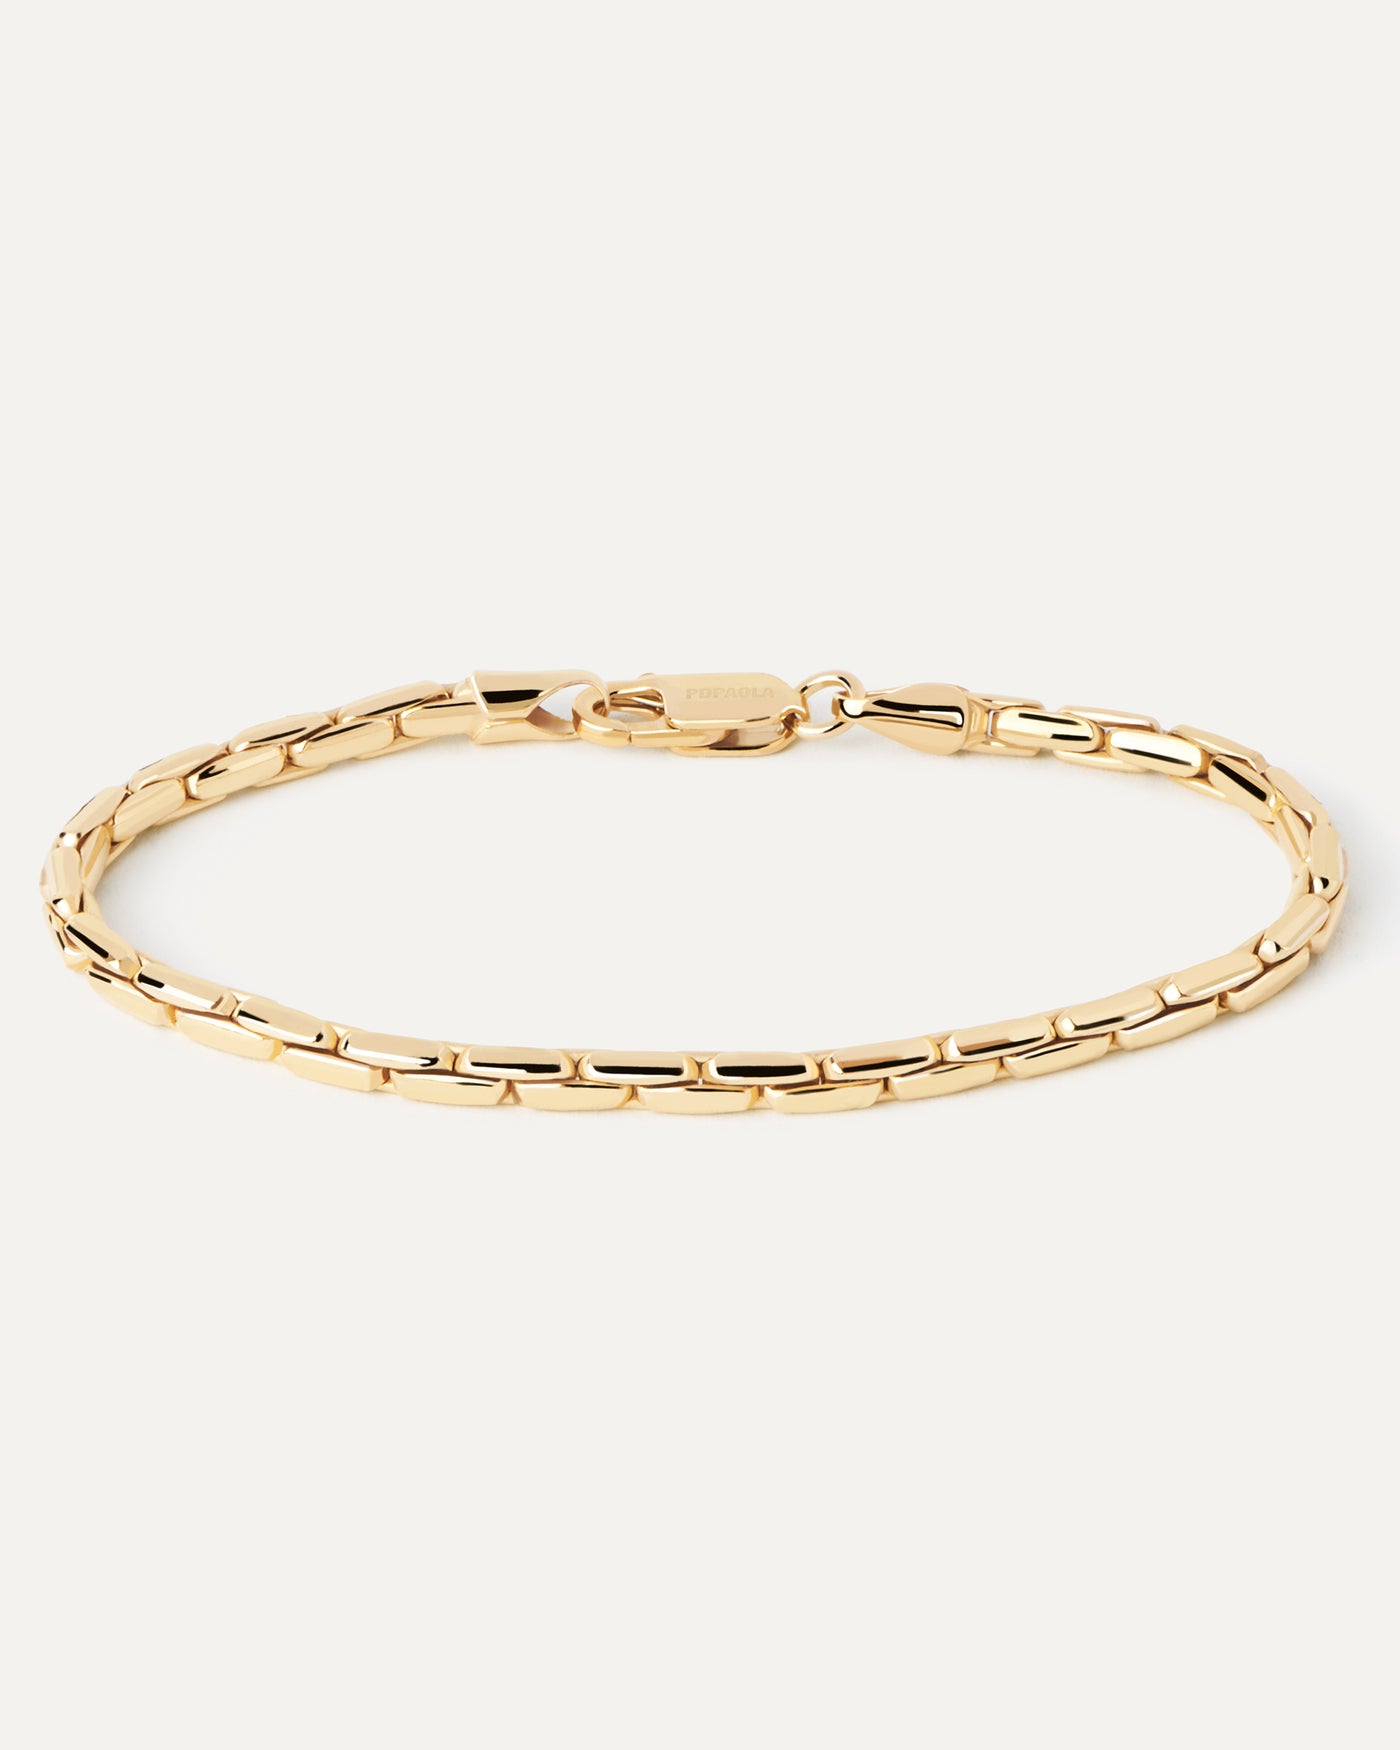 2023 Selection | Large Boston Chain Bracelet. Gold-plated boston thick chain bracelet with elongated links. Get the latest arrival from PDPAOLA. Place your order safely and get this Best Seller. Free Shipping.